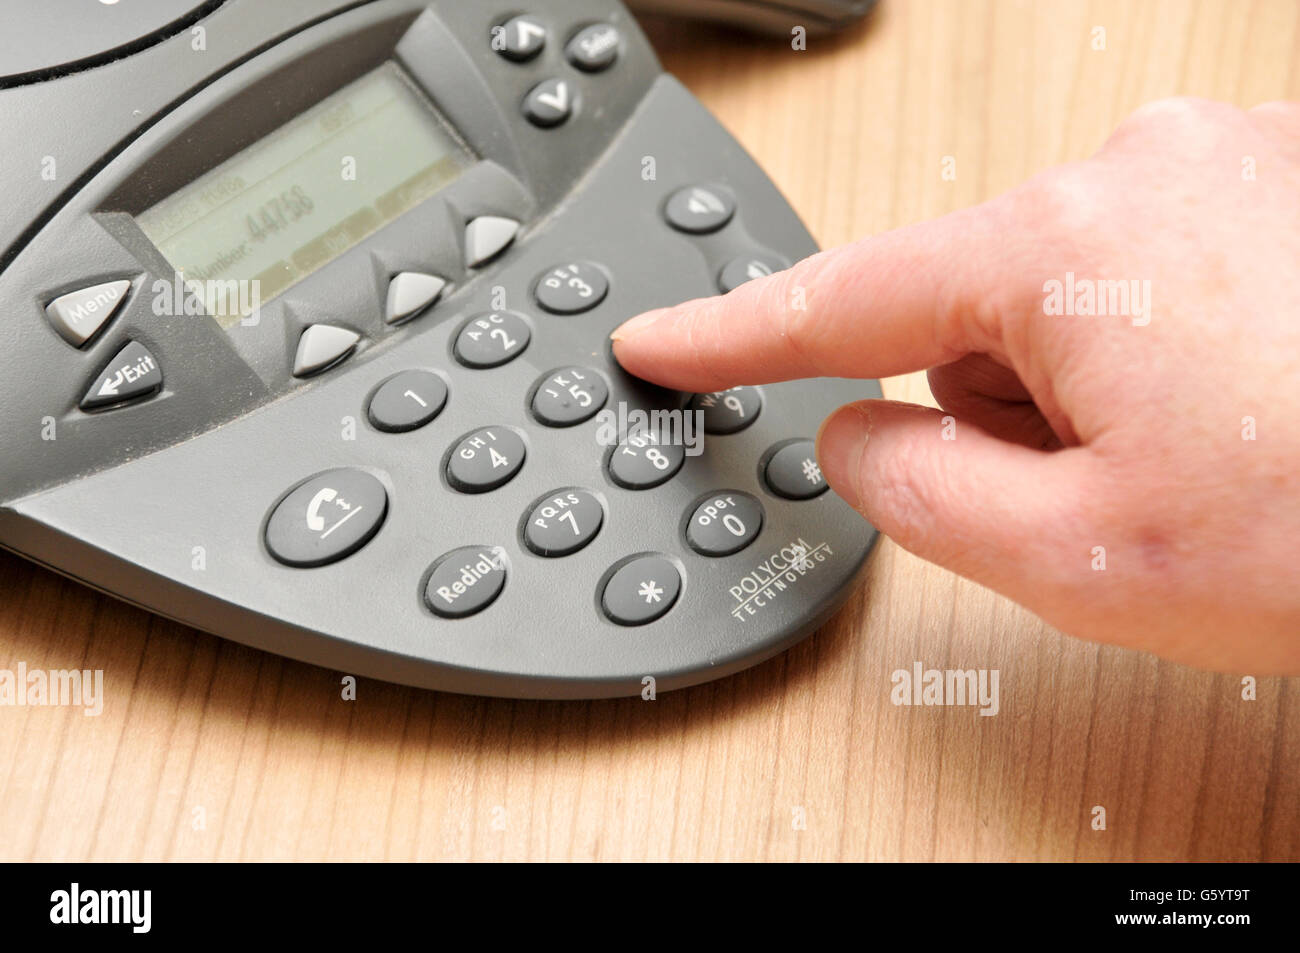 A female employee dials a telephone number on a conference call phone during a meeting Stock Photo